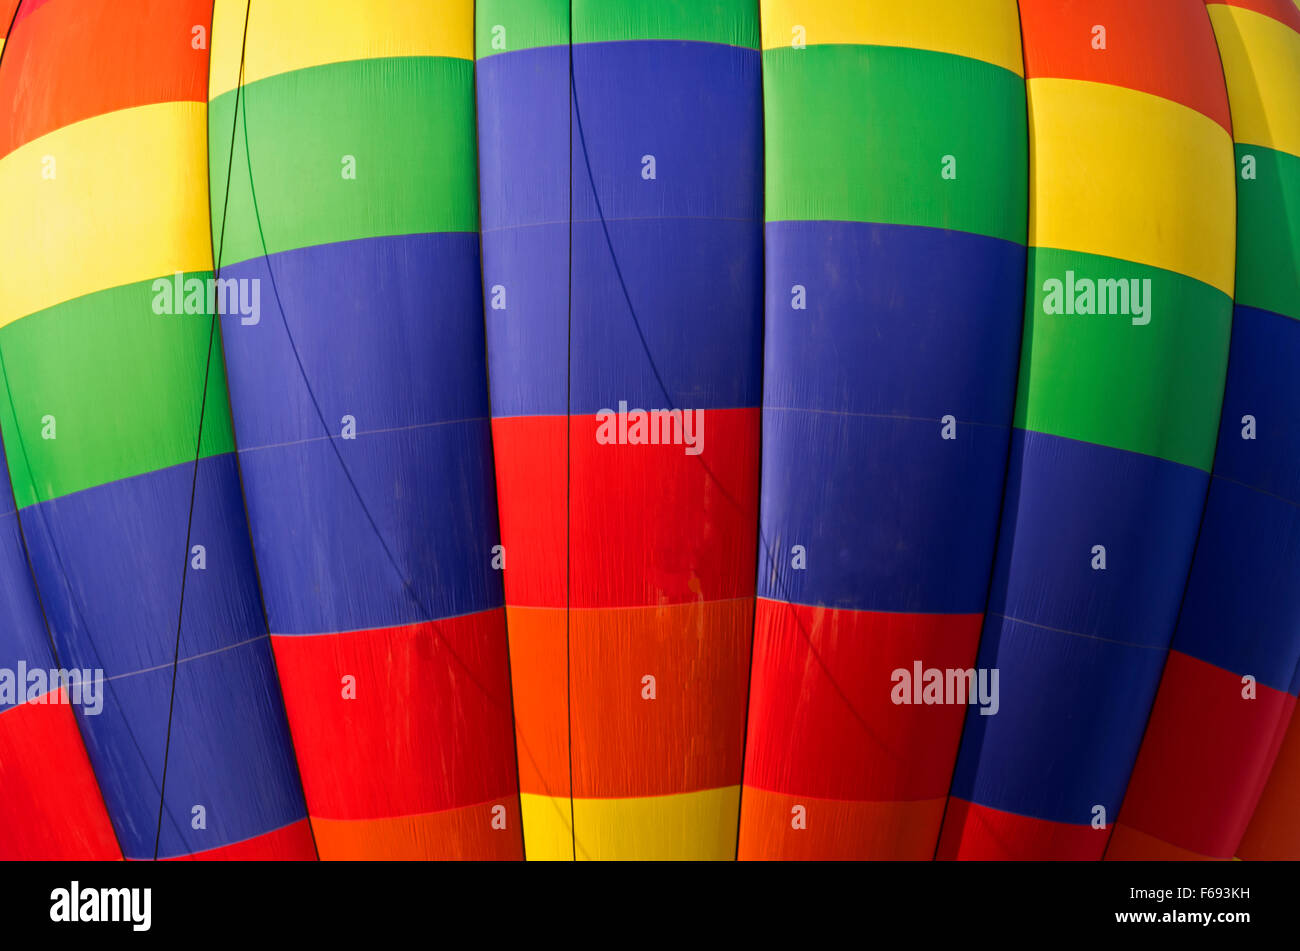 Close up of multi-colored balloon, red, orange, yellow, blue, and green. Stock Photo